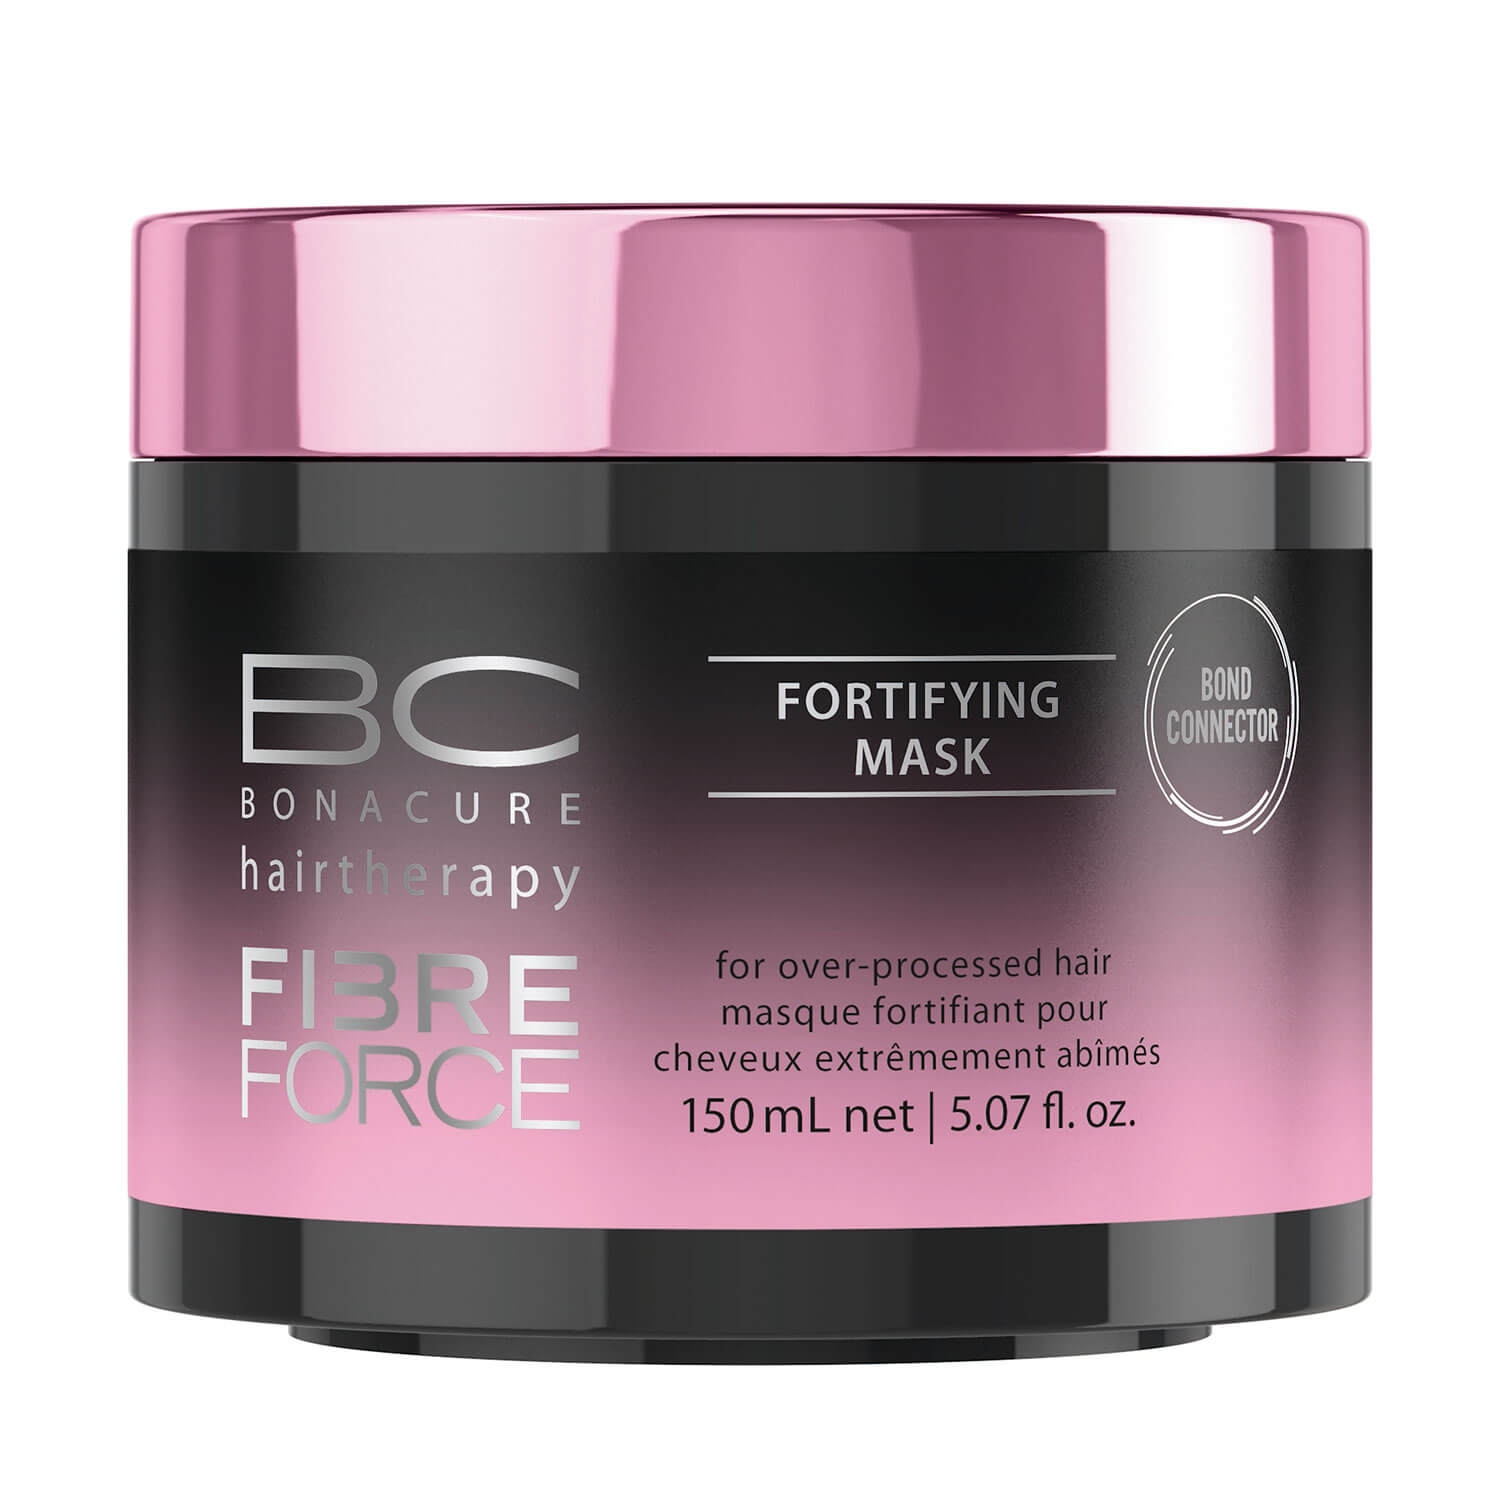 Product image from BC Fibre Force - Fortifying Mask